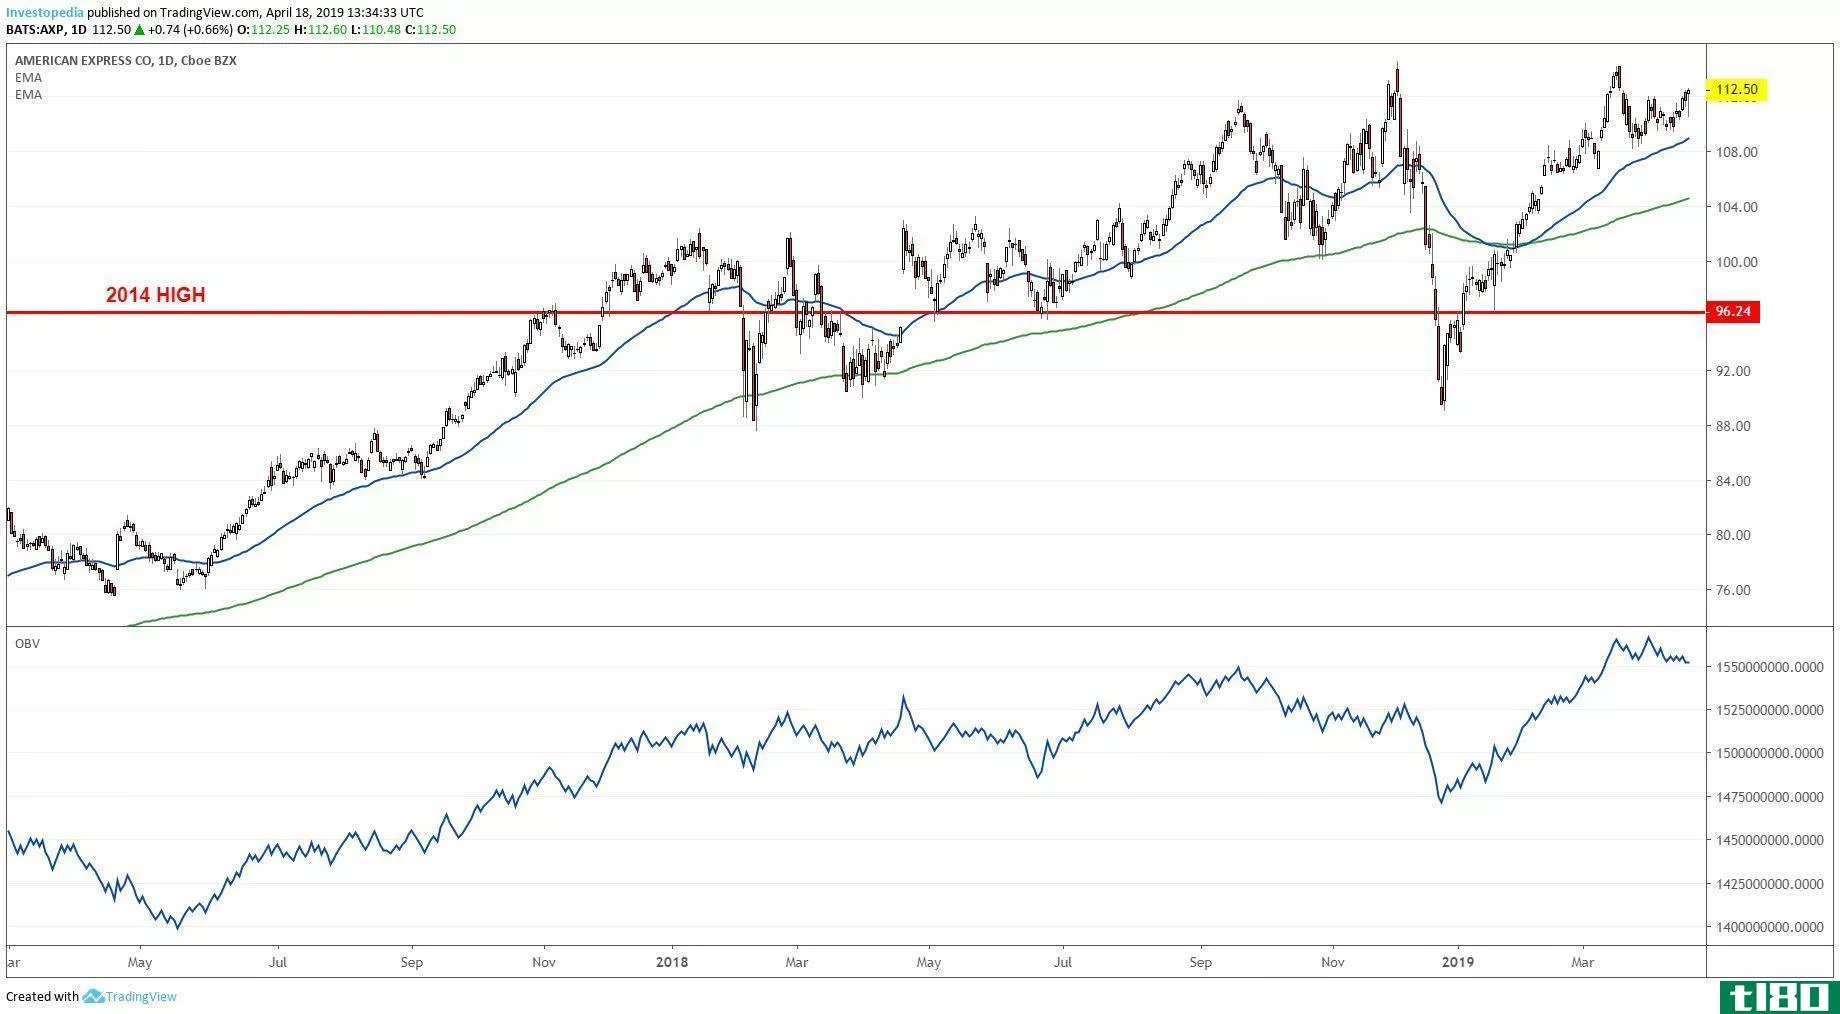 Short-term technical chart showing the share price performance of American Express Company (AXP)